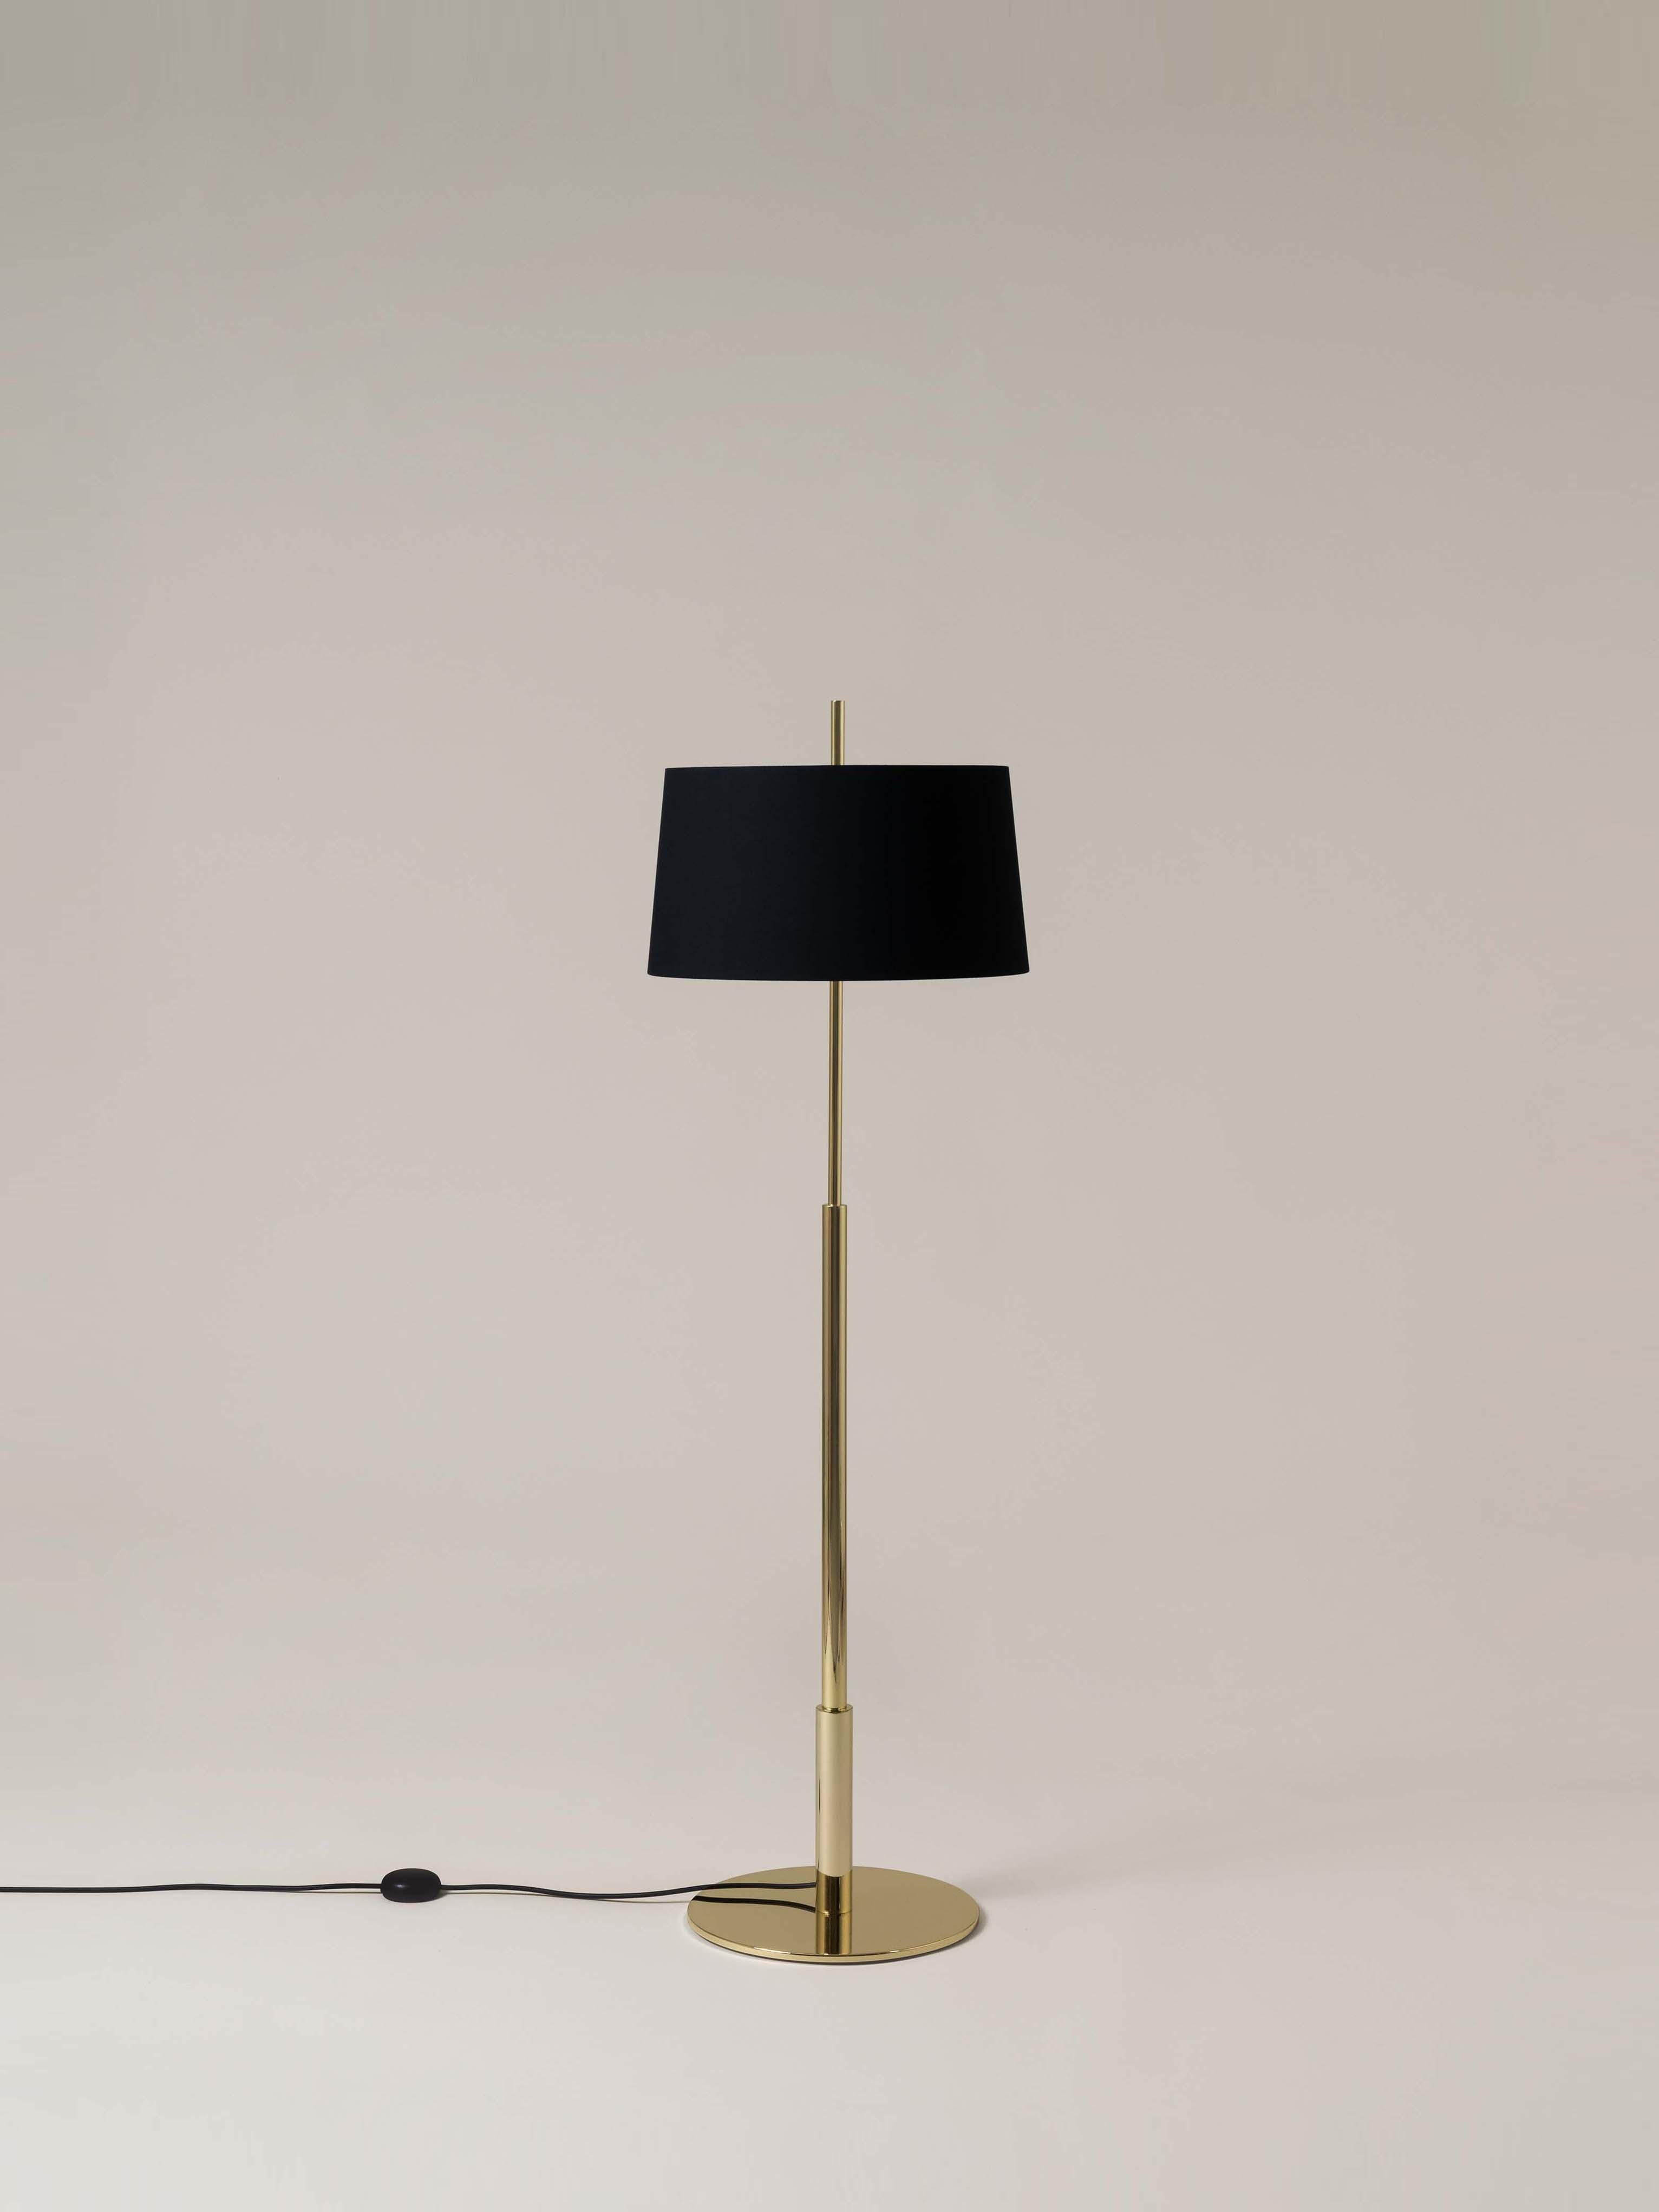 Gold diana floor lamp by Federico Correa, Alfonso Milá, Miguel Milá
Dimensions: D 45 x H 146 cm
Materials: Metal, linen.
Available in nickel or gold and in black or white shade.

In keeping with the calling of its creators, the Diana lamp has a